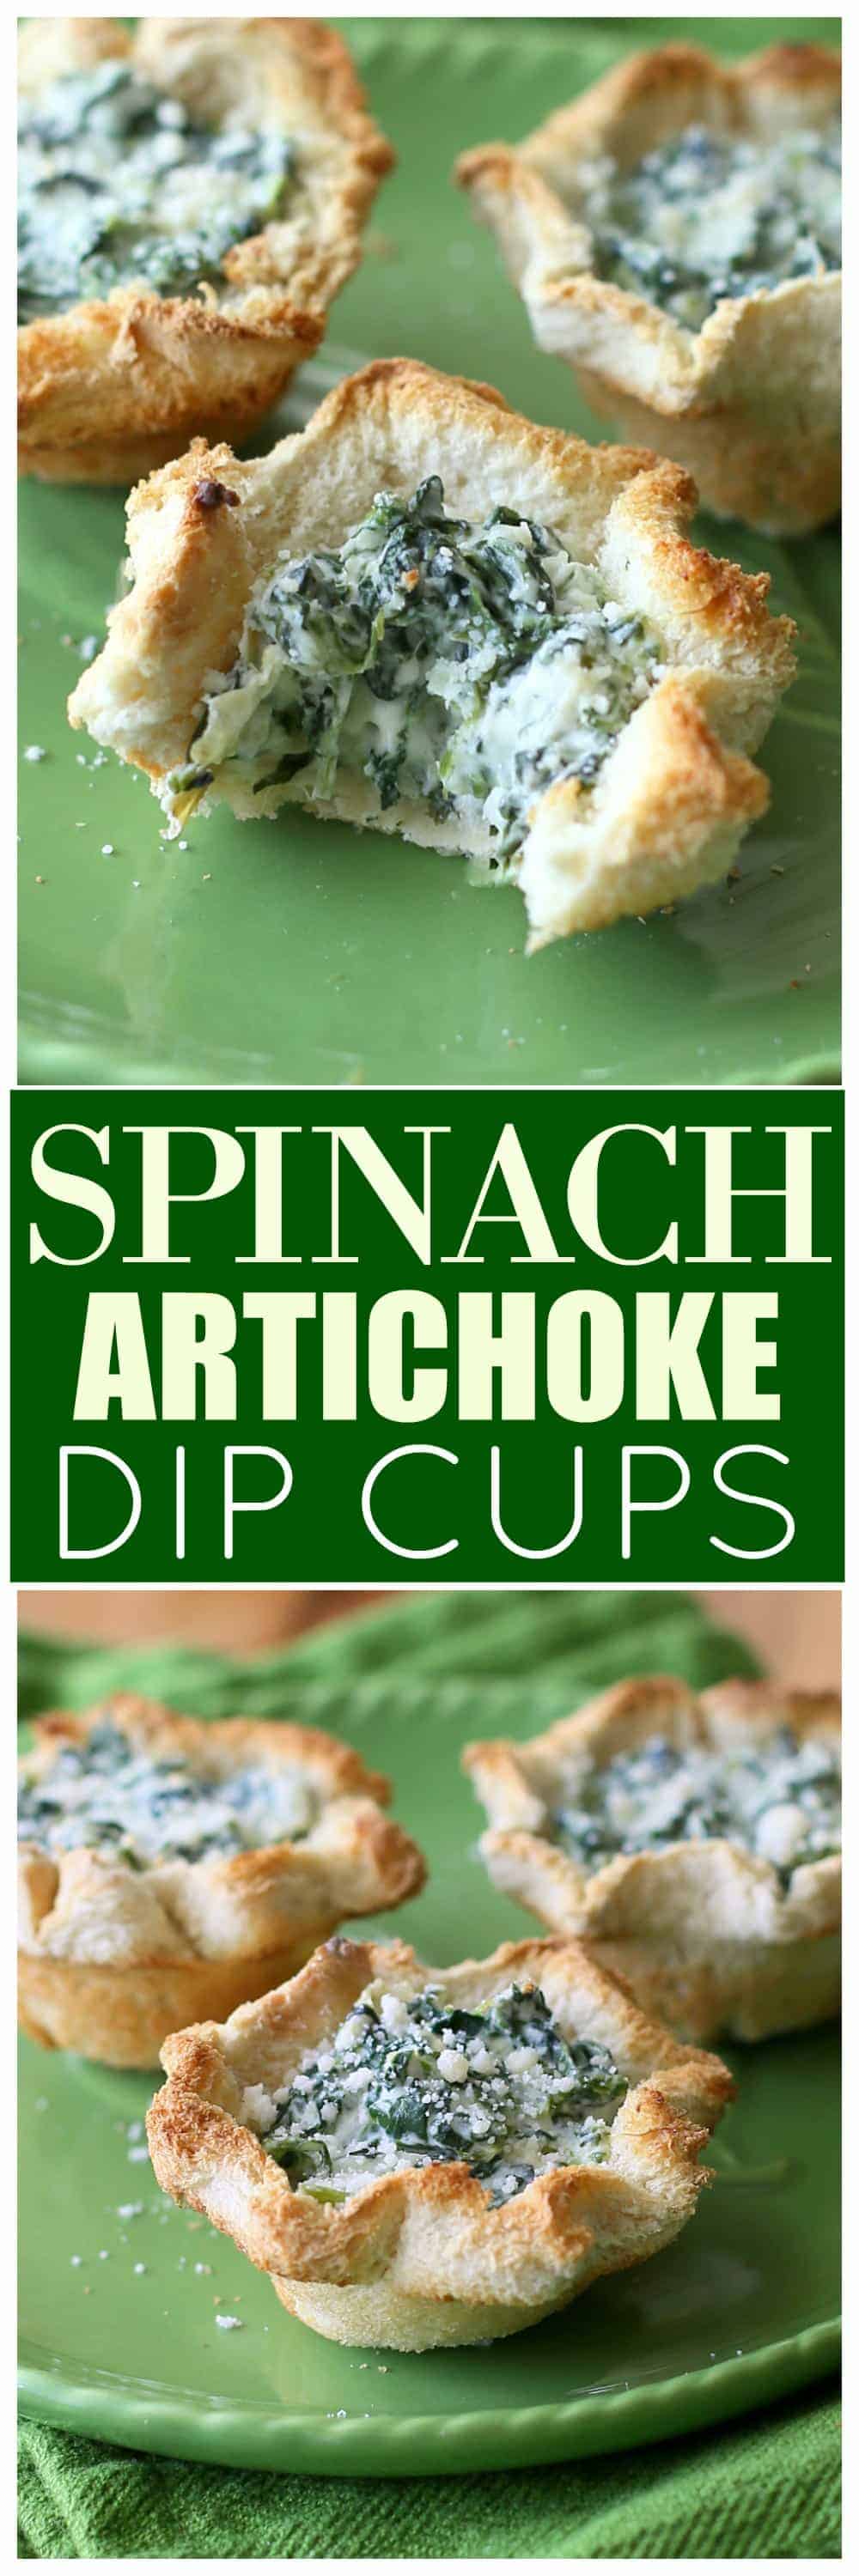 These Spinach Artichoke Dip Cups are spinach dip in a toasty bread cup. The perfect pass around appetizer for parties or holidays. Think spinach dip with the bread all in one! #spinach #dip #appetizer #bread